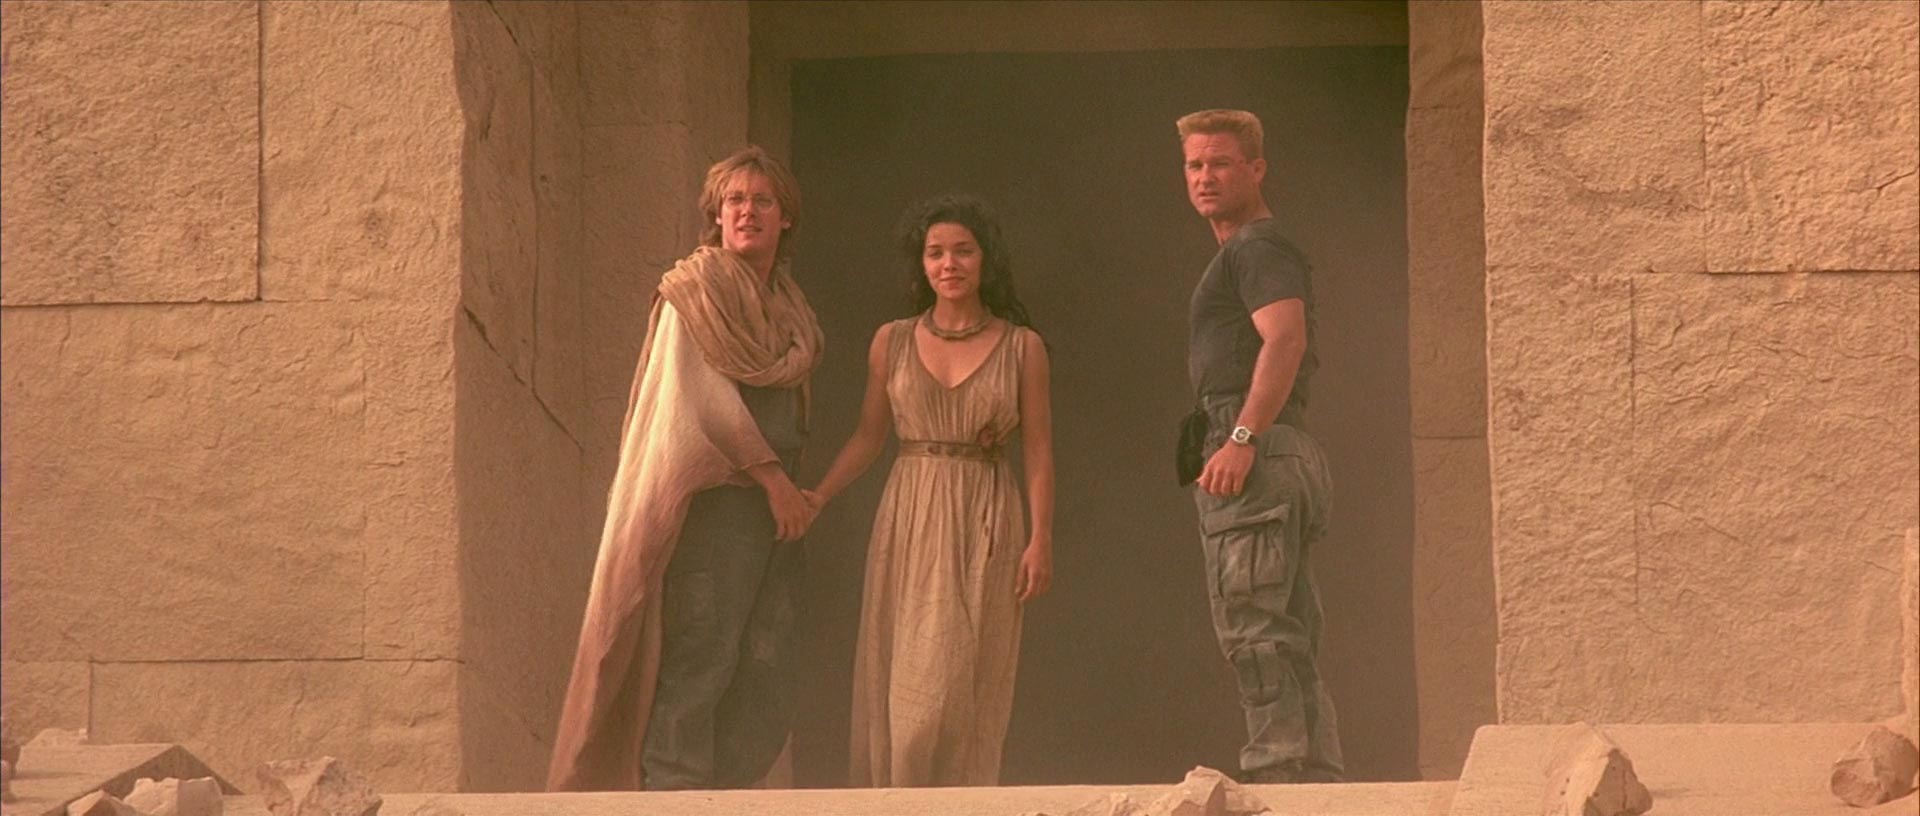 Stargate:
During Dr. Daniel Jackson's first discussion of the age of the cover stones, Dr. 

Barbara Shore mentions carbon dating. Carbon dating technique would be useless on 

stone or metal; it can give the age only of once-living matter.